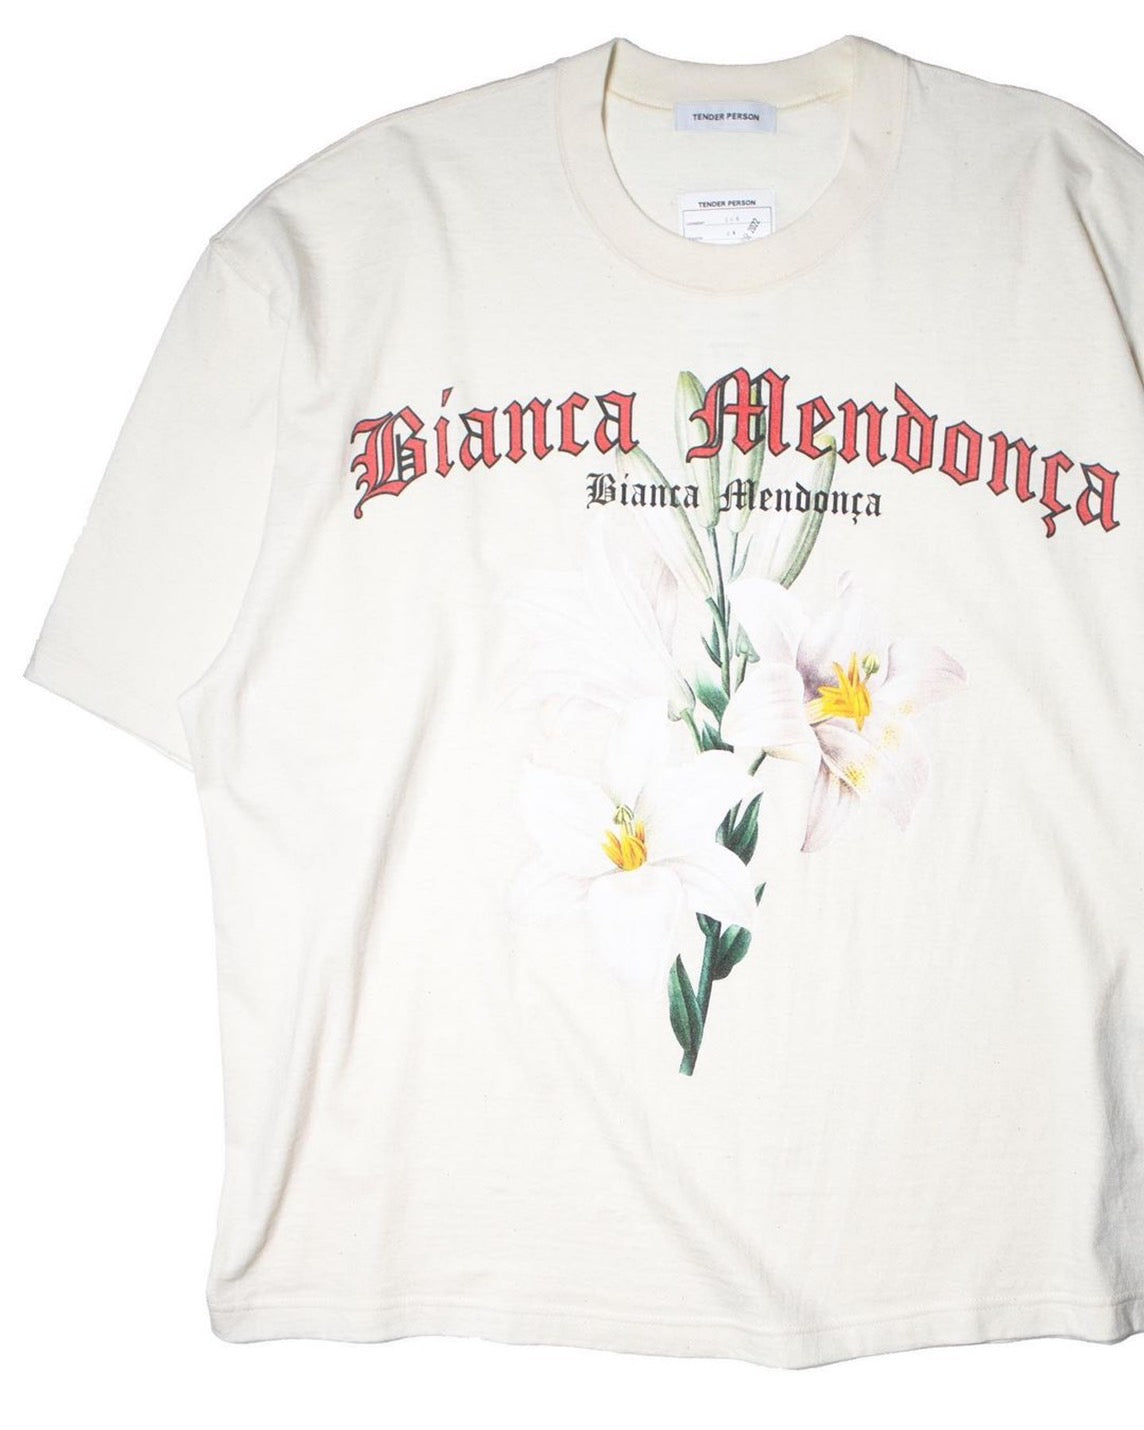 TENDER PERSON "BIANCA" T-SHIRTS / TENDER PERSON